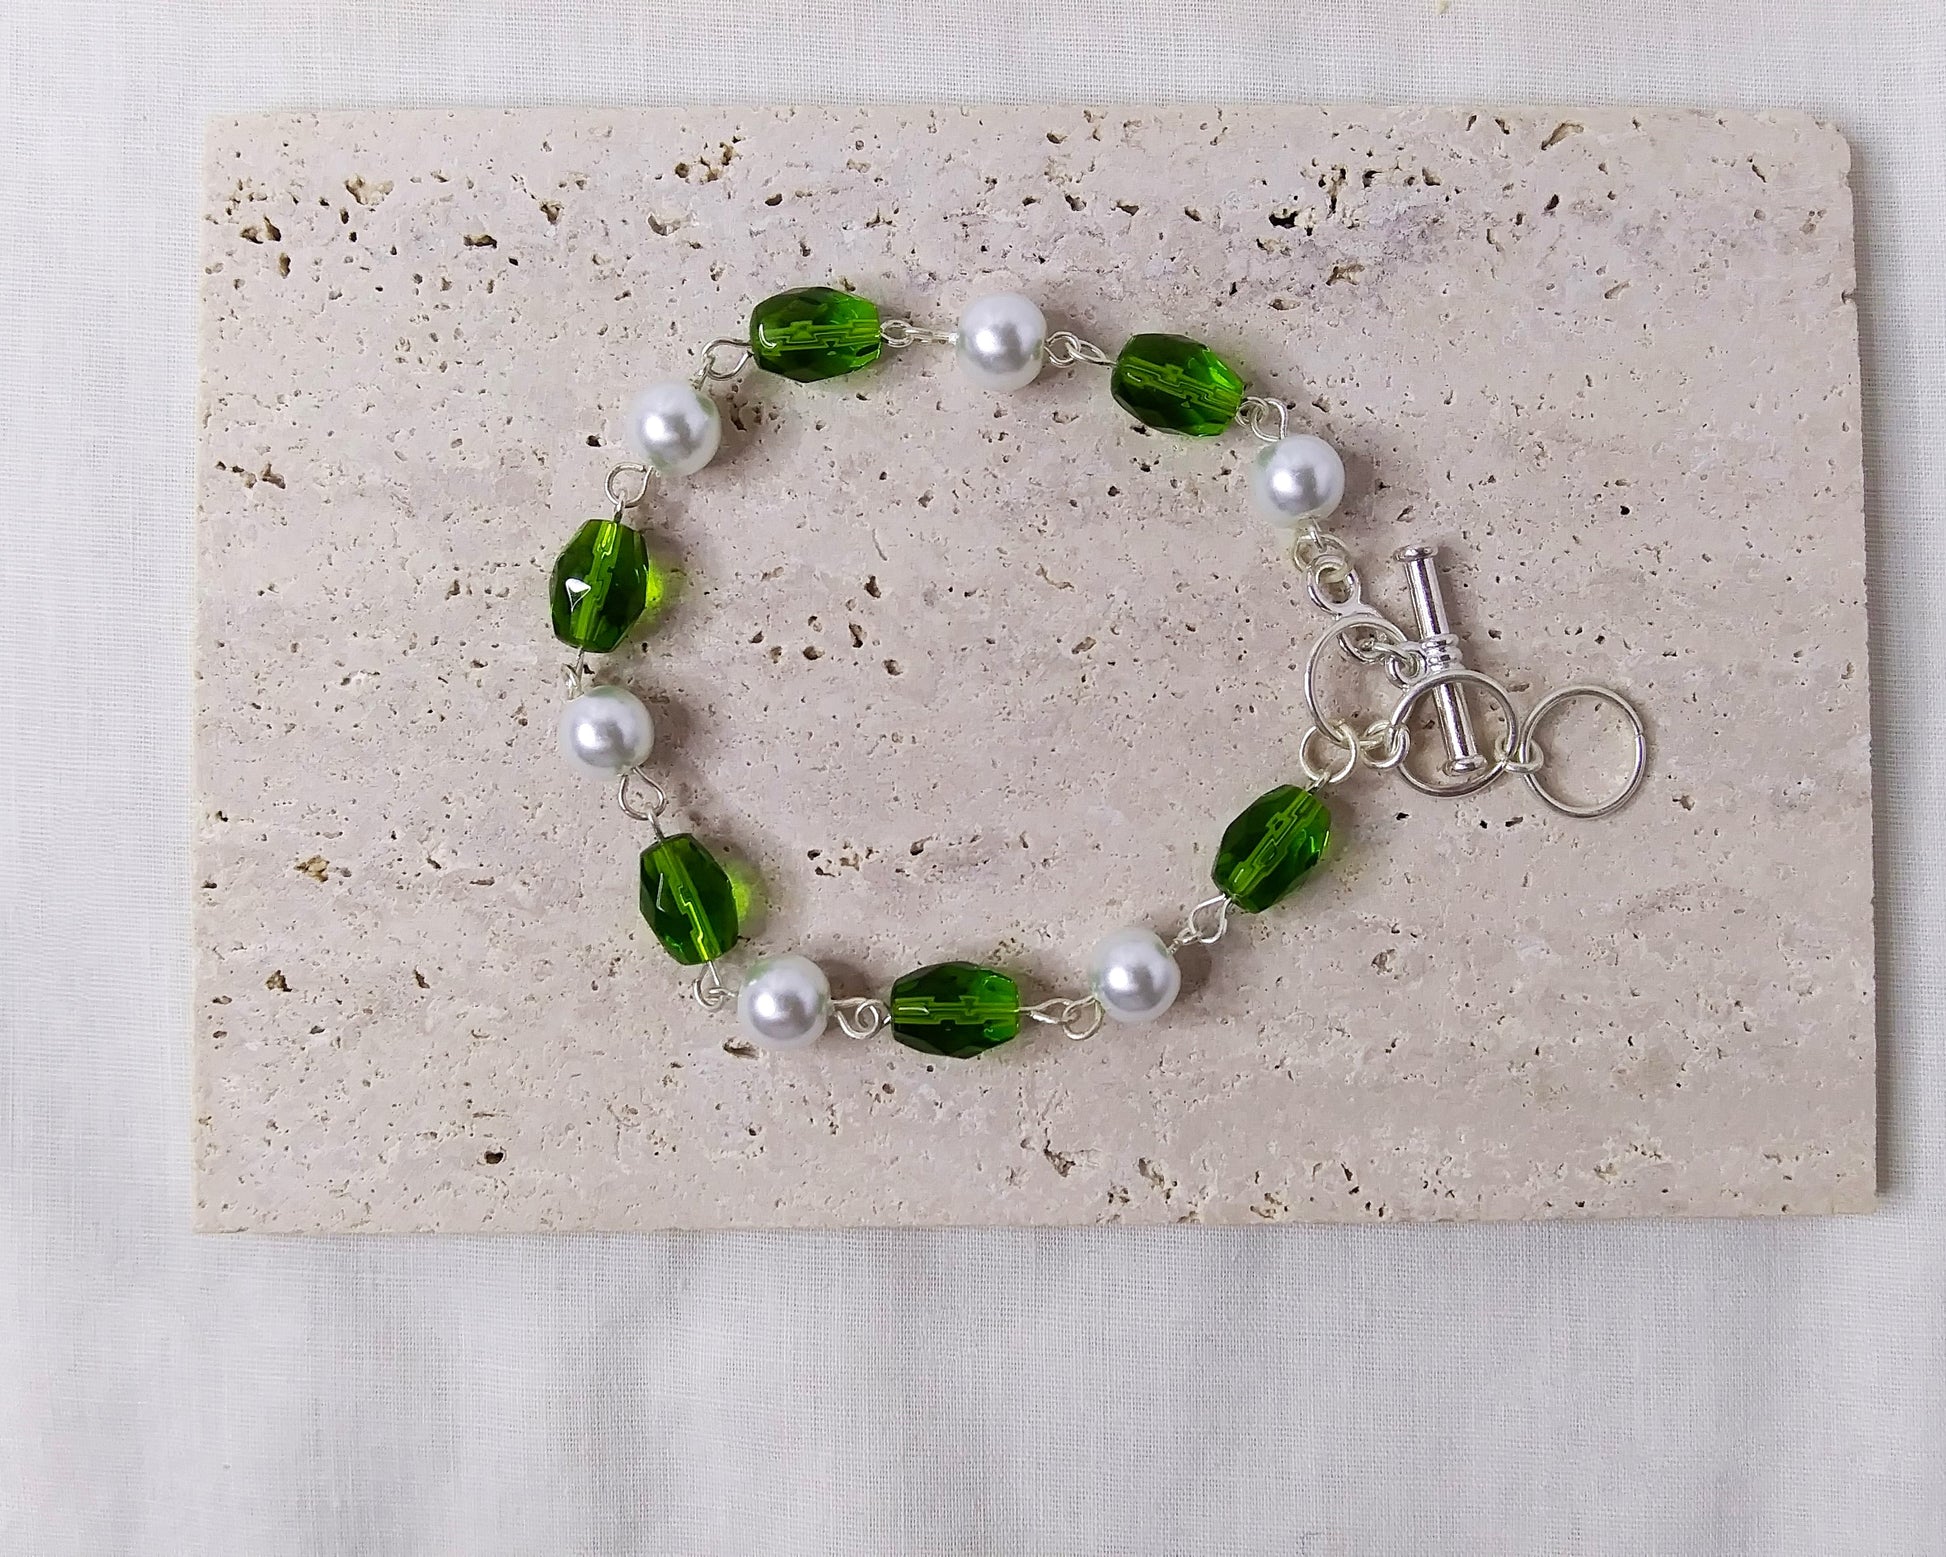 green white and silver beaded bracelet with toggle clasp